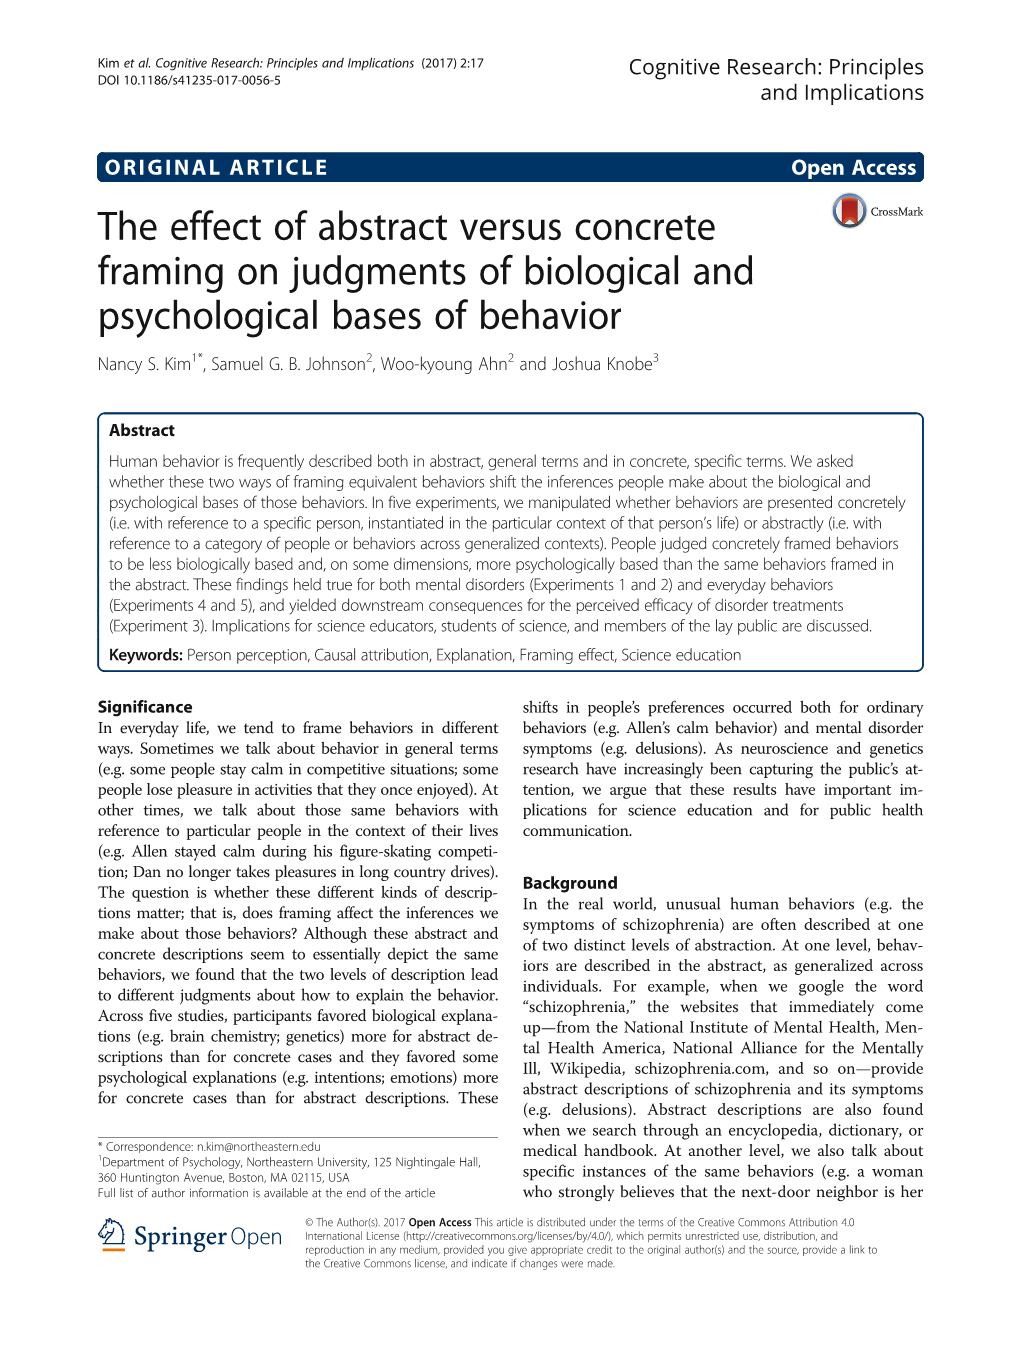 The Effect of Abstract Versus Concrete Framing on Judgments of Biological and Psychological Bases of Behavior Nancy S